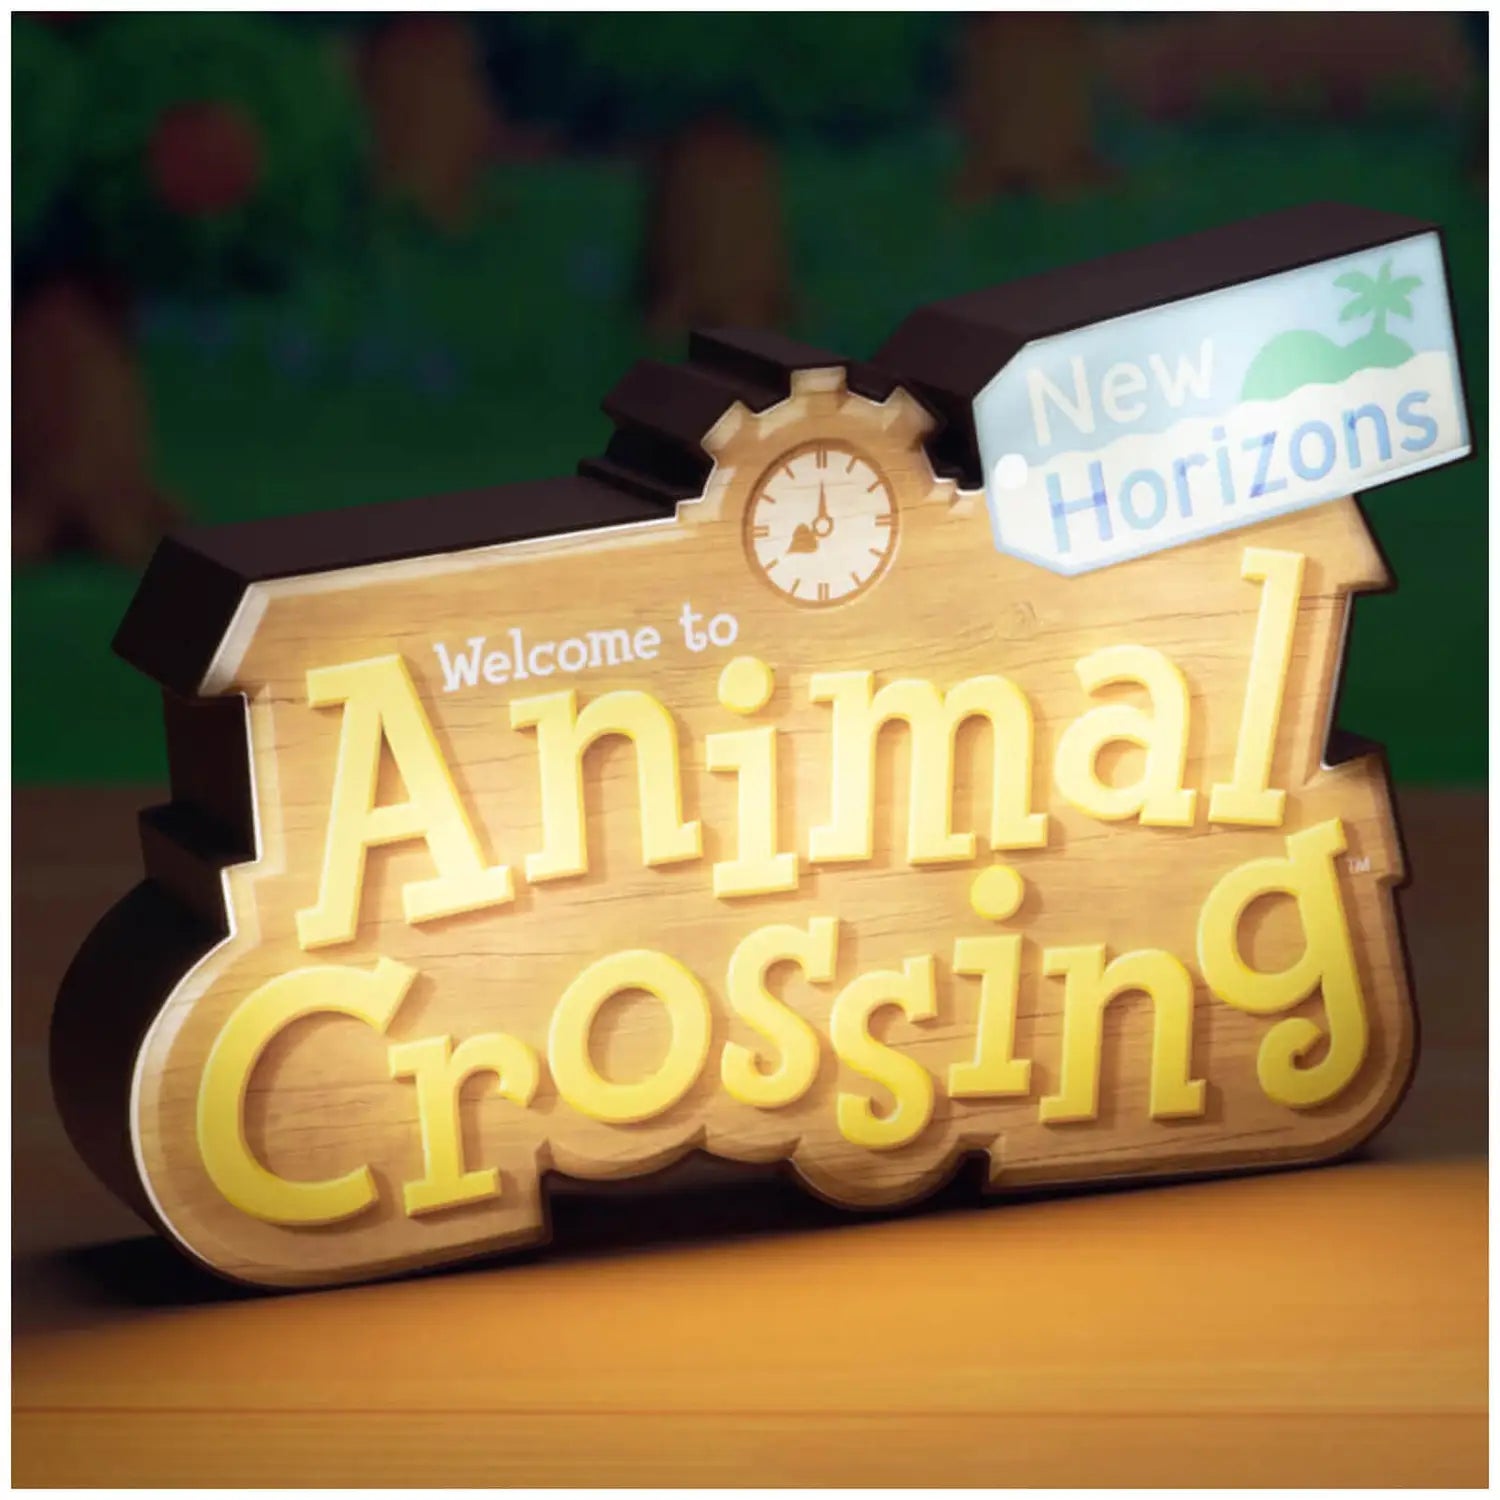 Illuminate your space with the delightful Paladone Animal Crossing Logo Light, featuring the recognizable emblem from the popular Nintendo game. This warm glow adds a cozy, inviting light to any room, making it ideal for Animal Crossing players and collectors. Bring the serene world of Animal Crossing to your home with this charming and calming logo light.